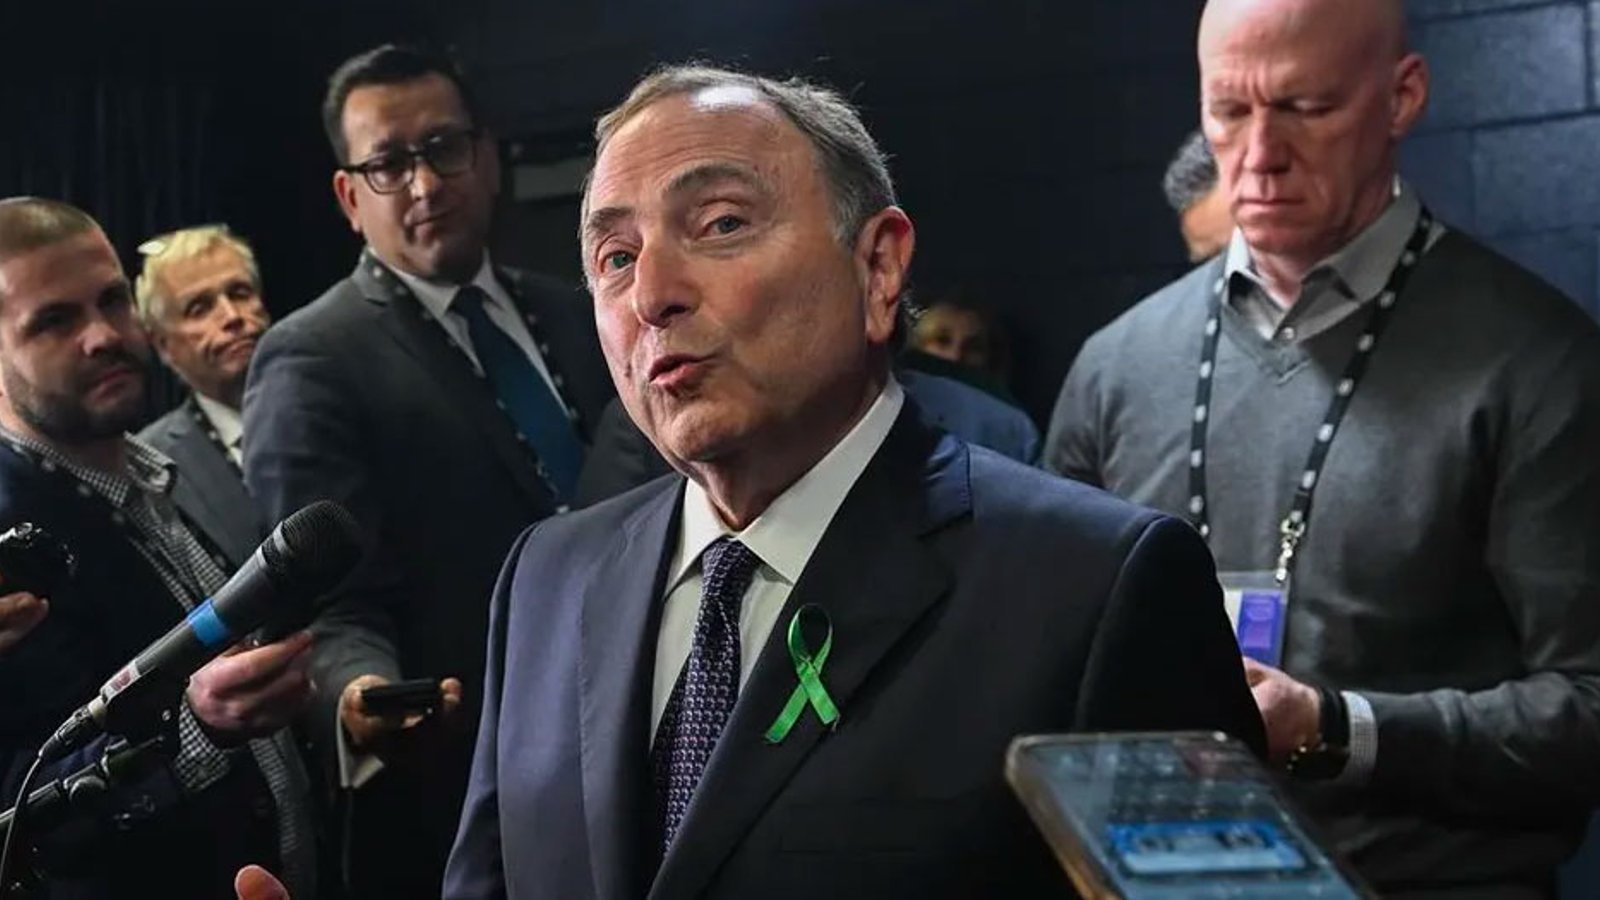 Bettman angers hockey fans across the NHL with comments about tanking for the 1st overall pick